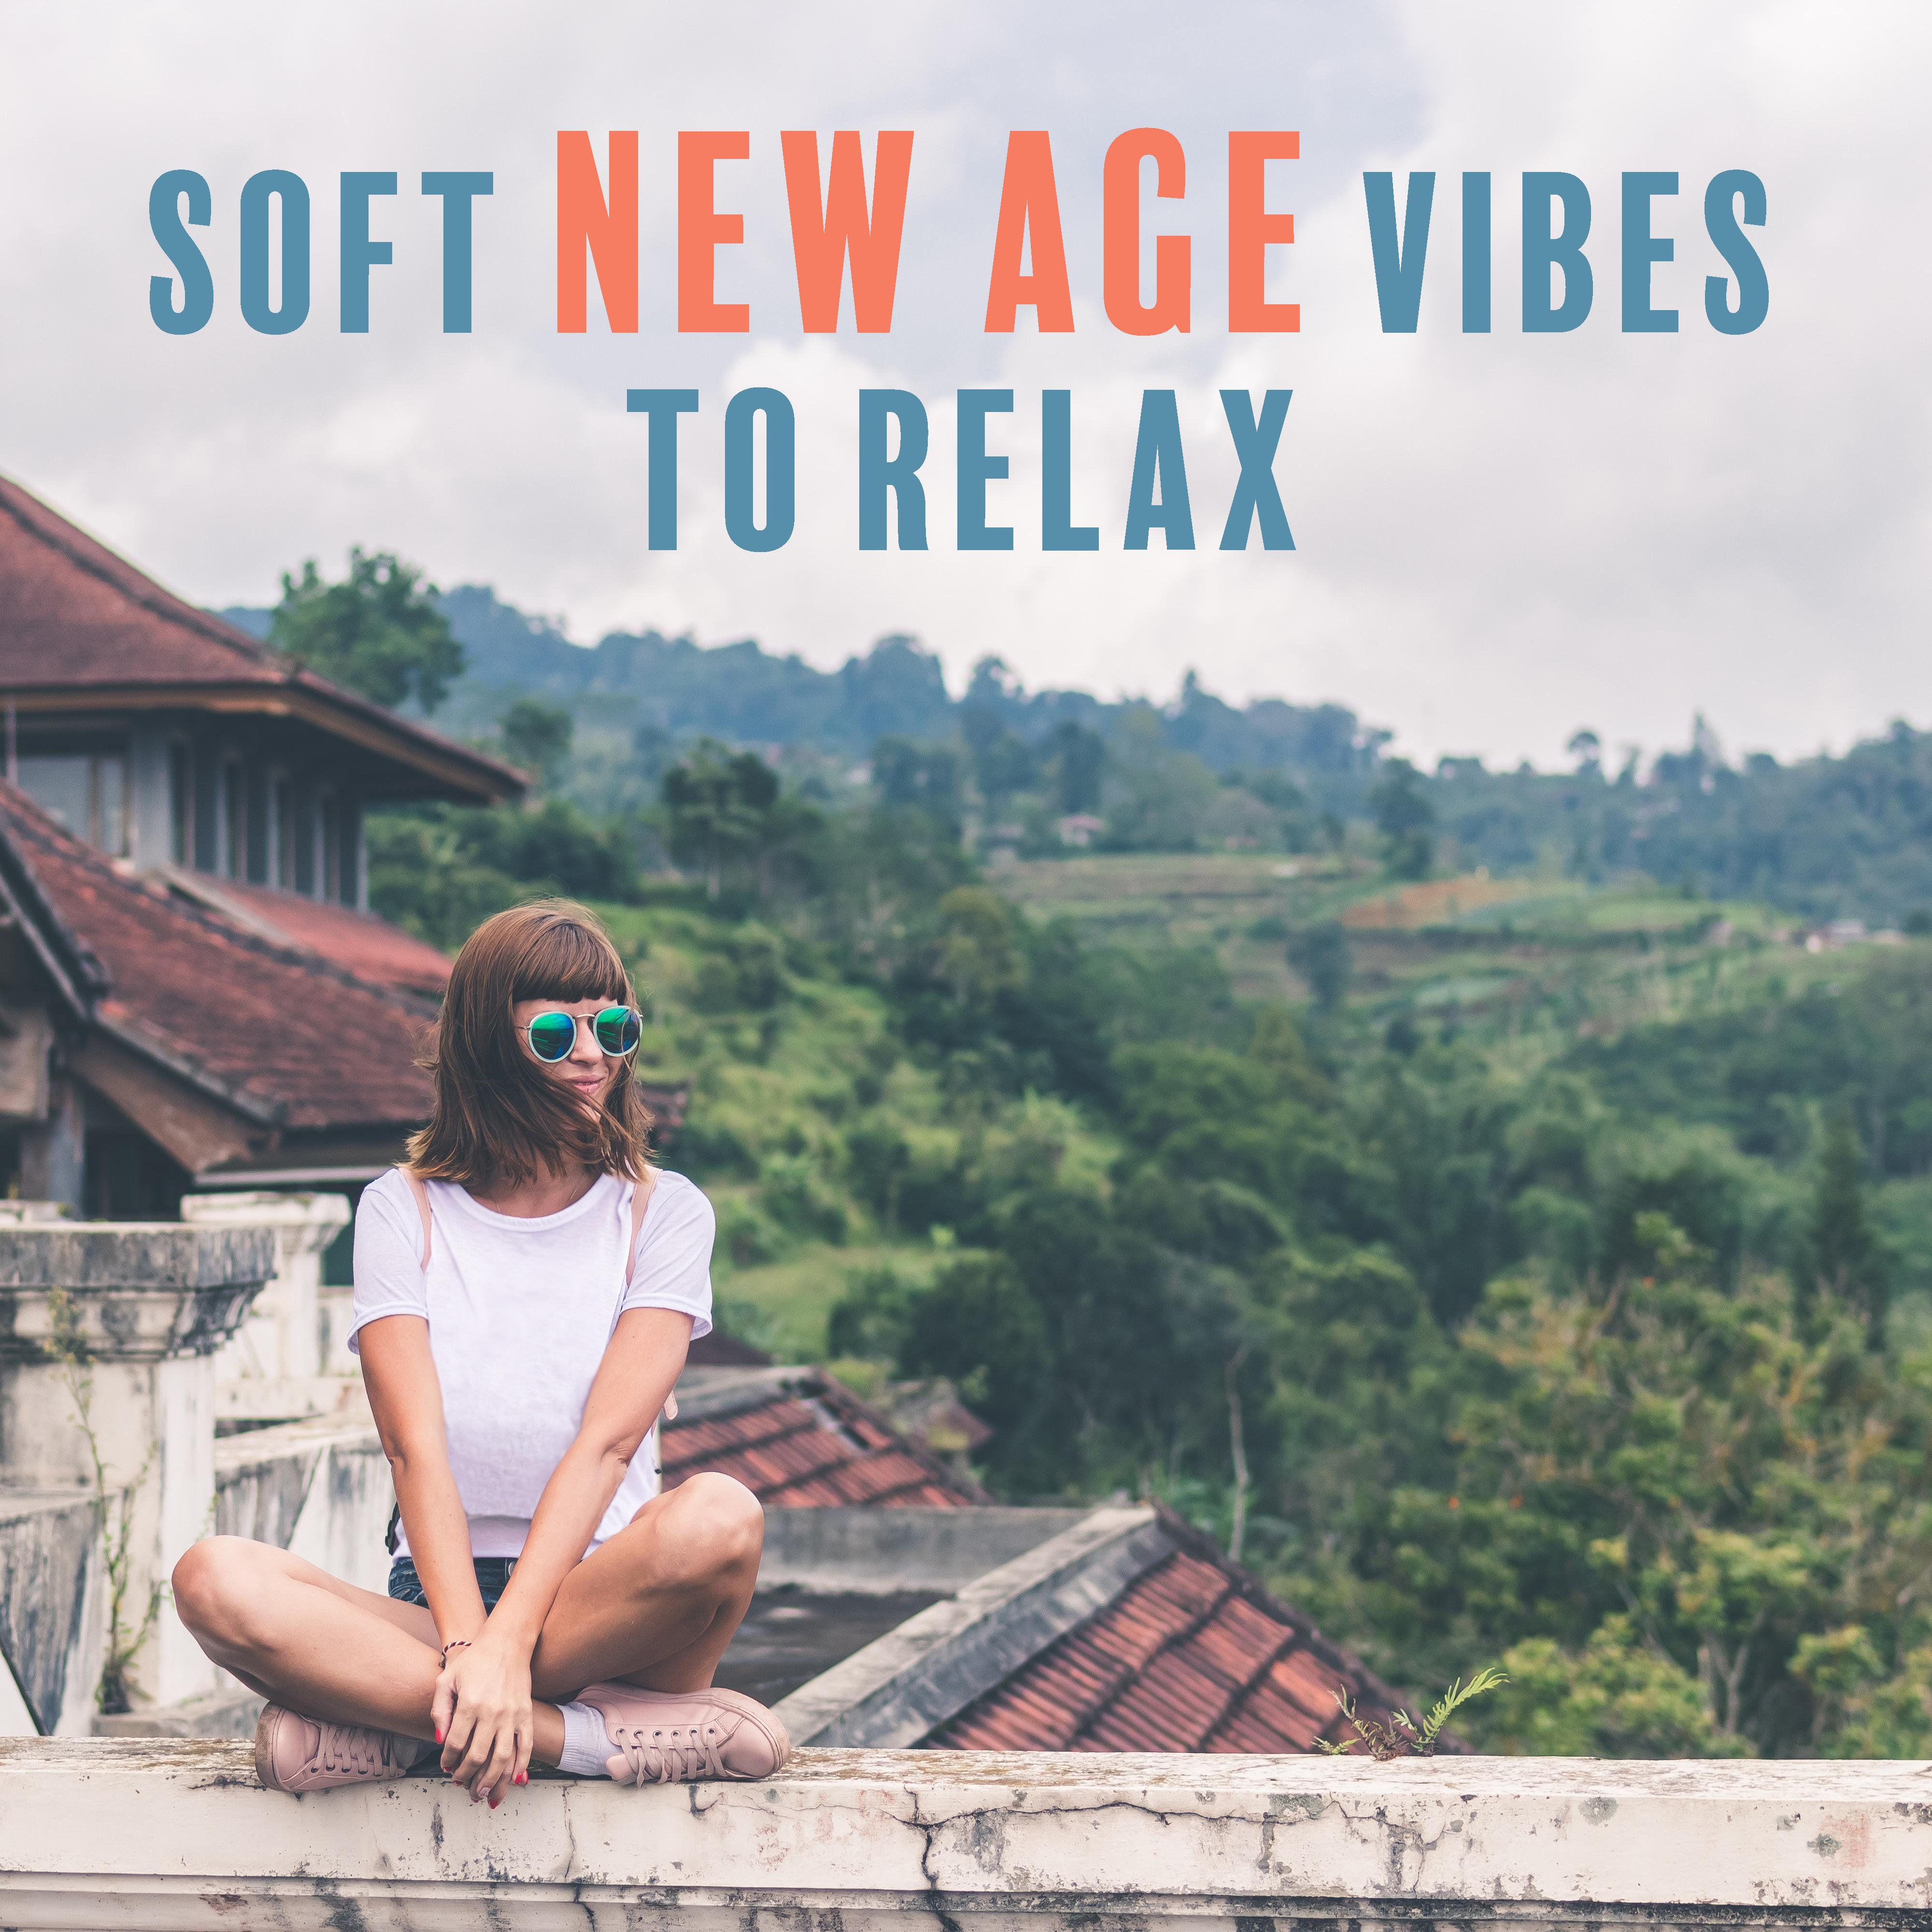 Soft New Age Vibes to Relax